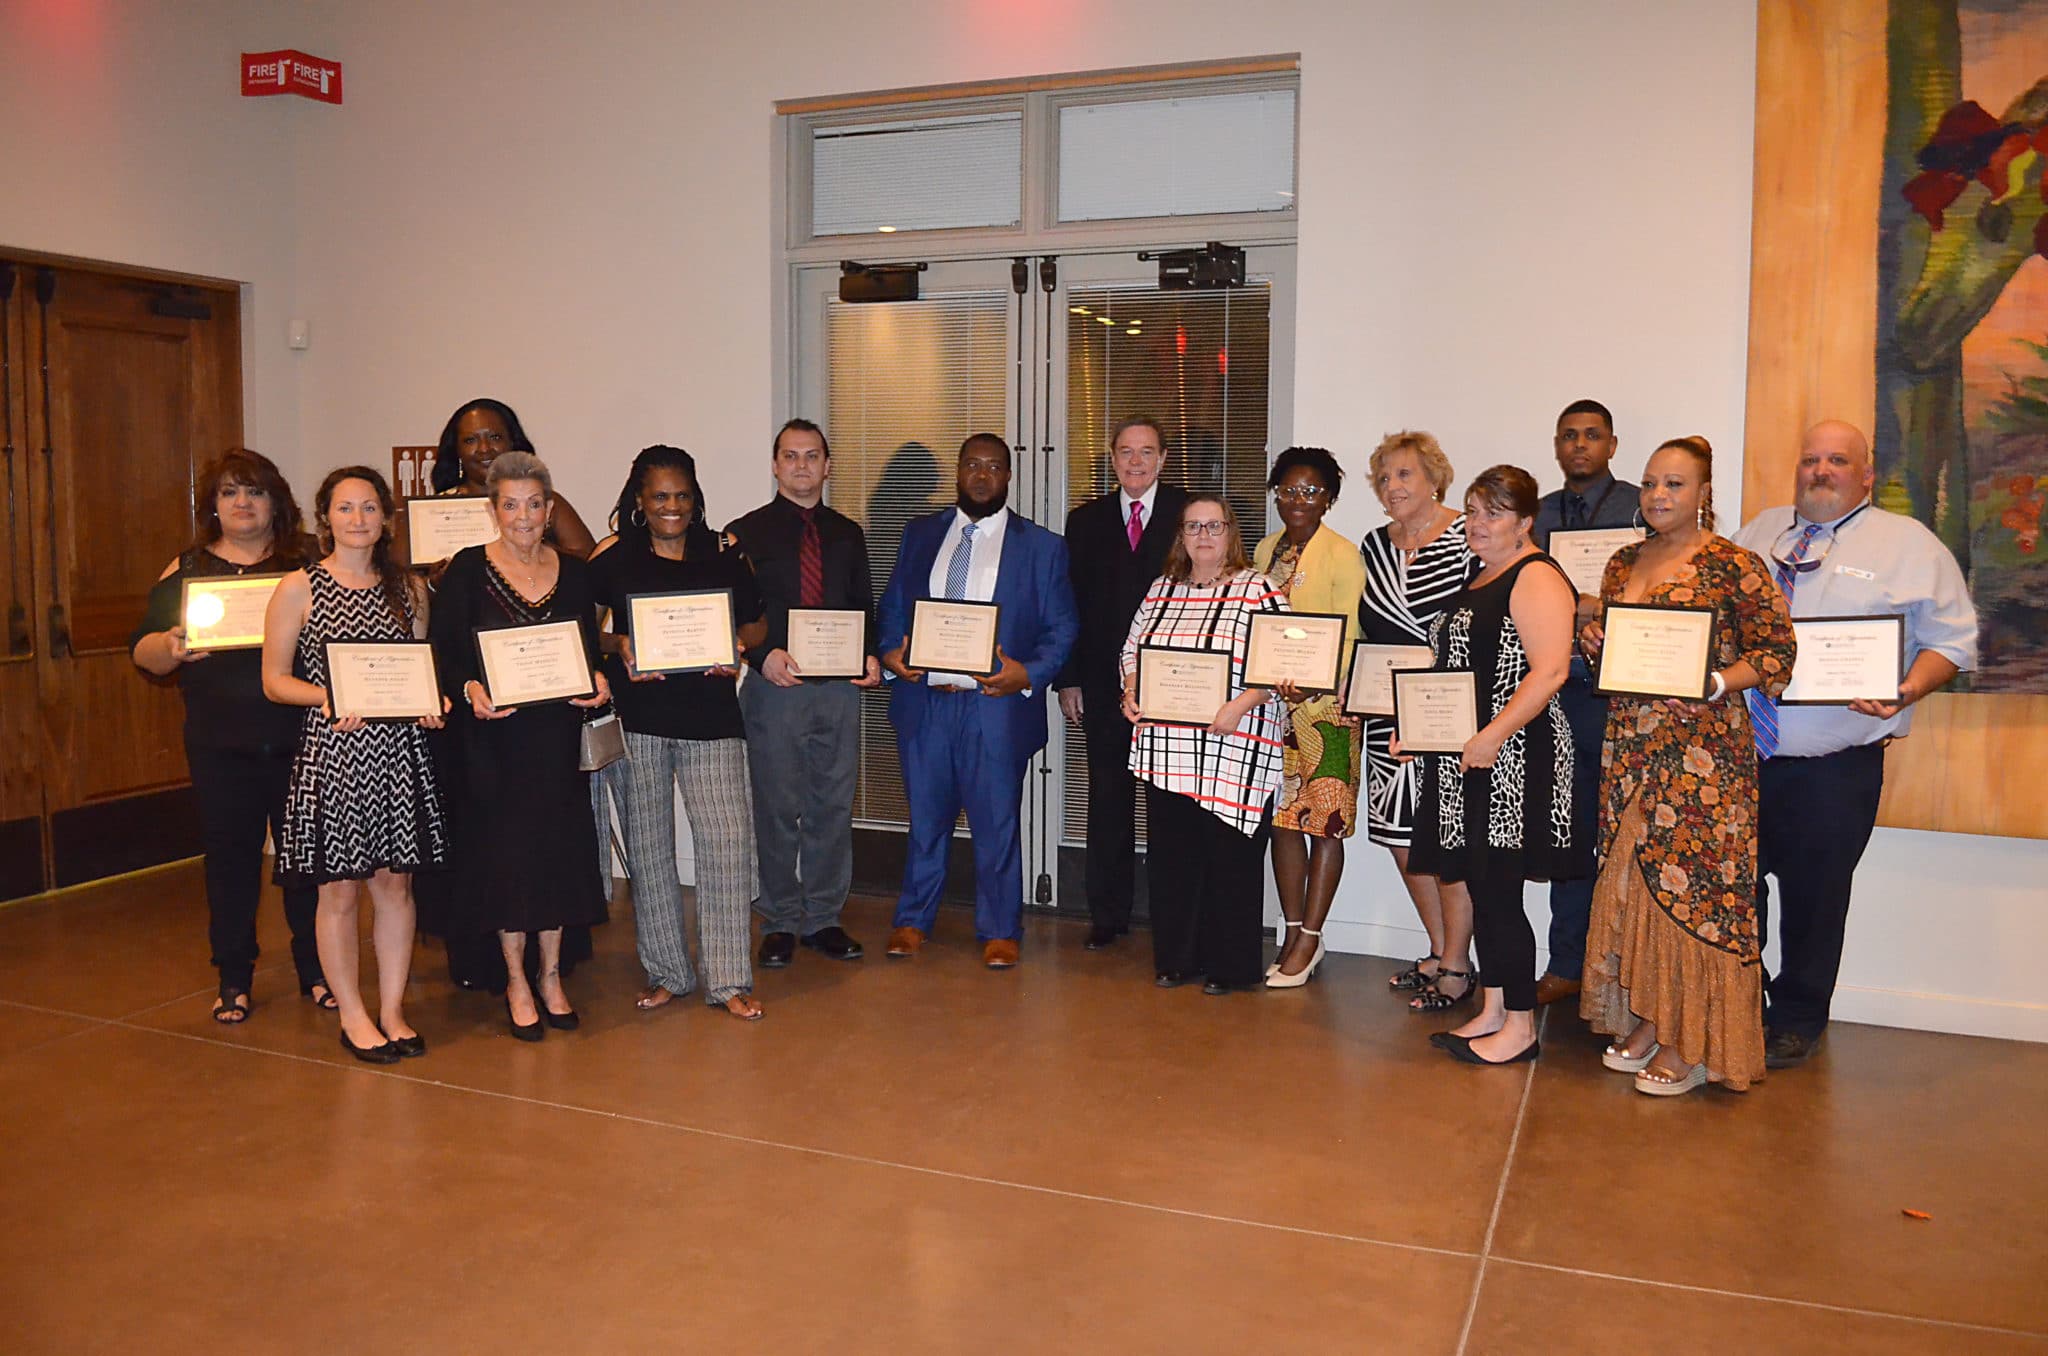 Community Options, Inc. seeks to recognize employees who exemplify excellence. Award winners are honored at the 2018 annual iMatter Conference.